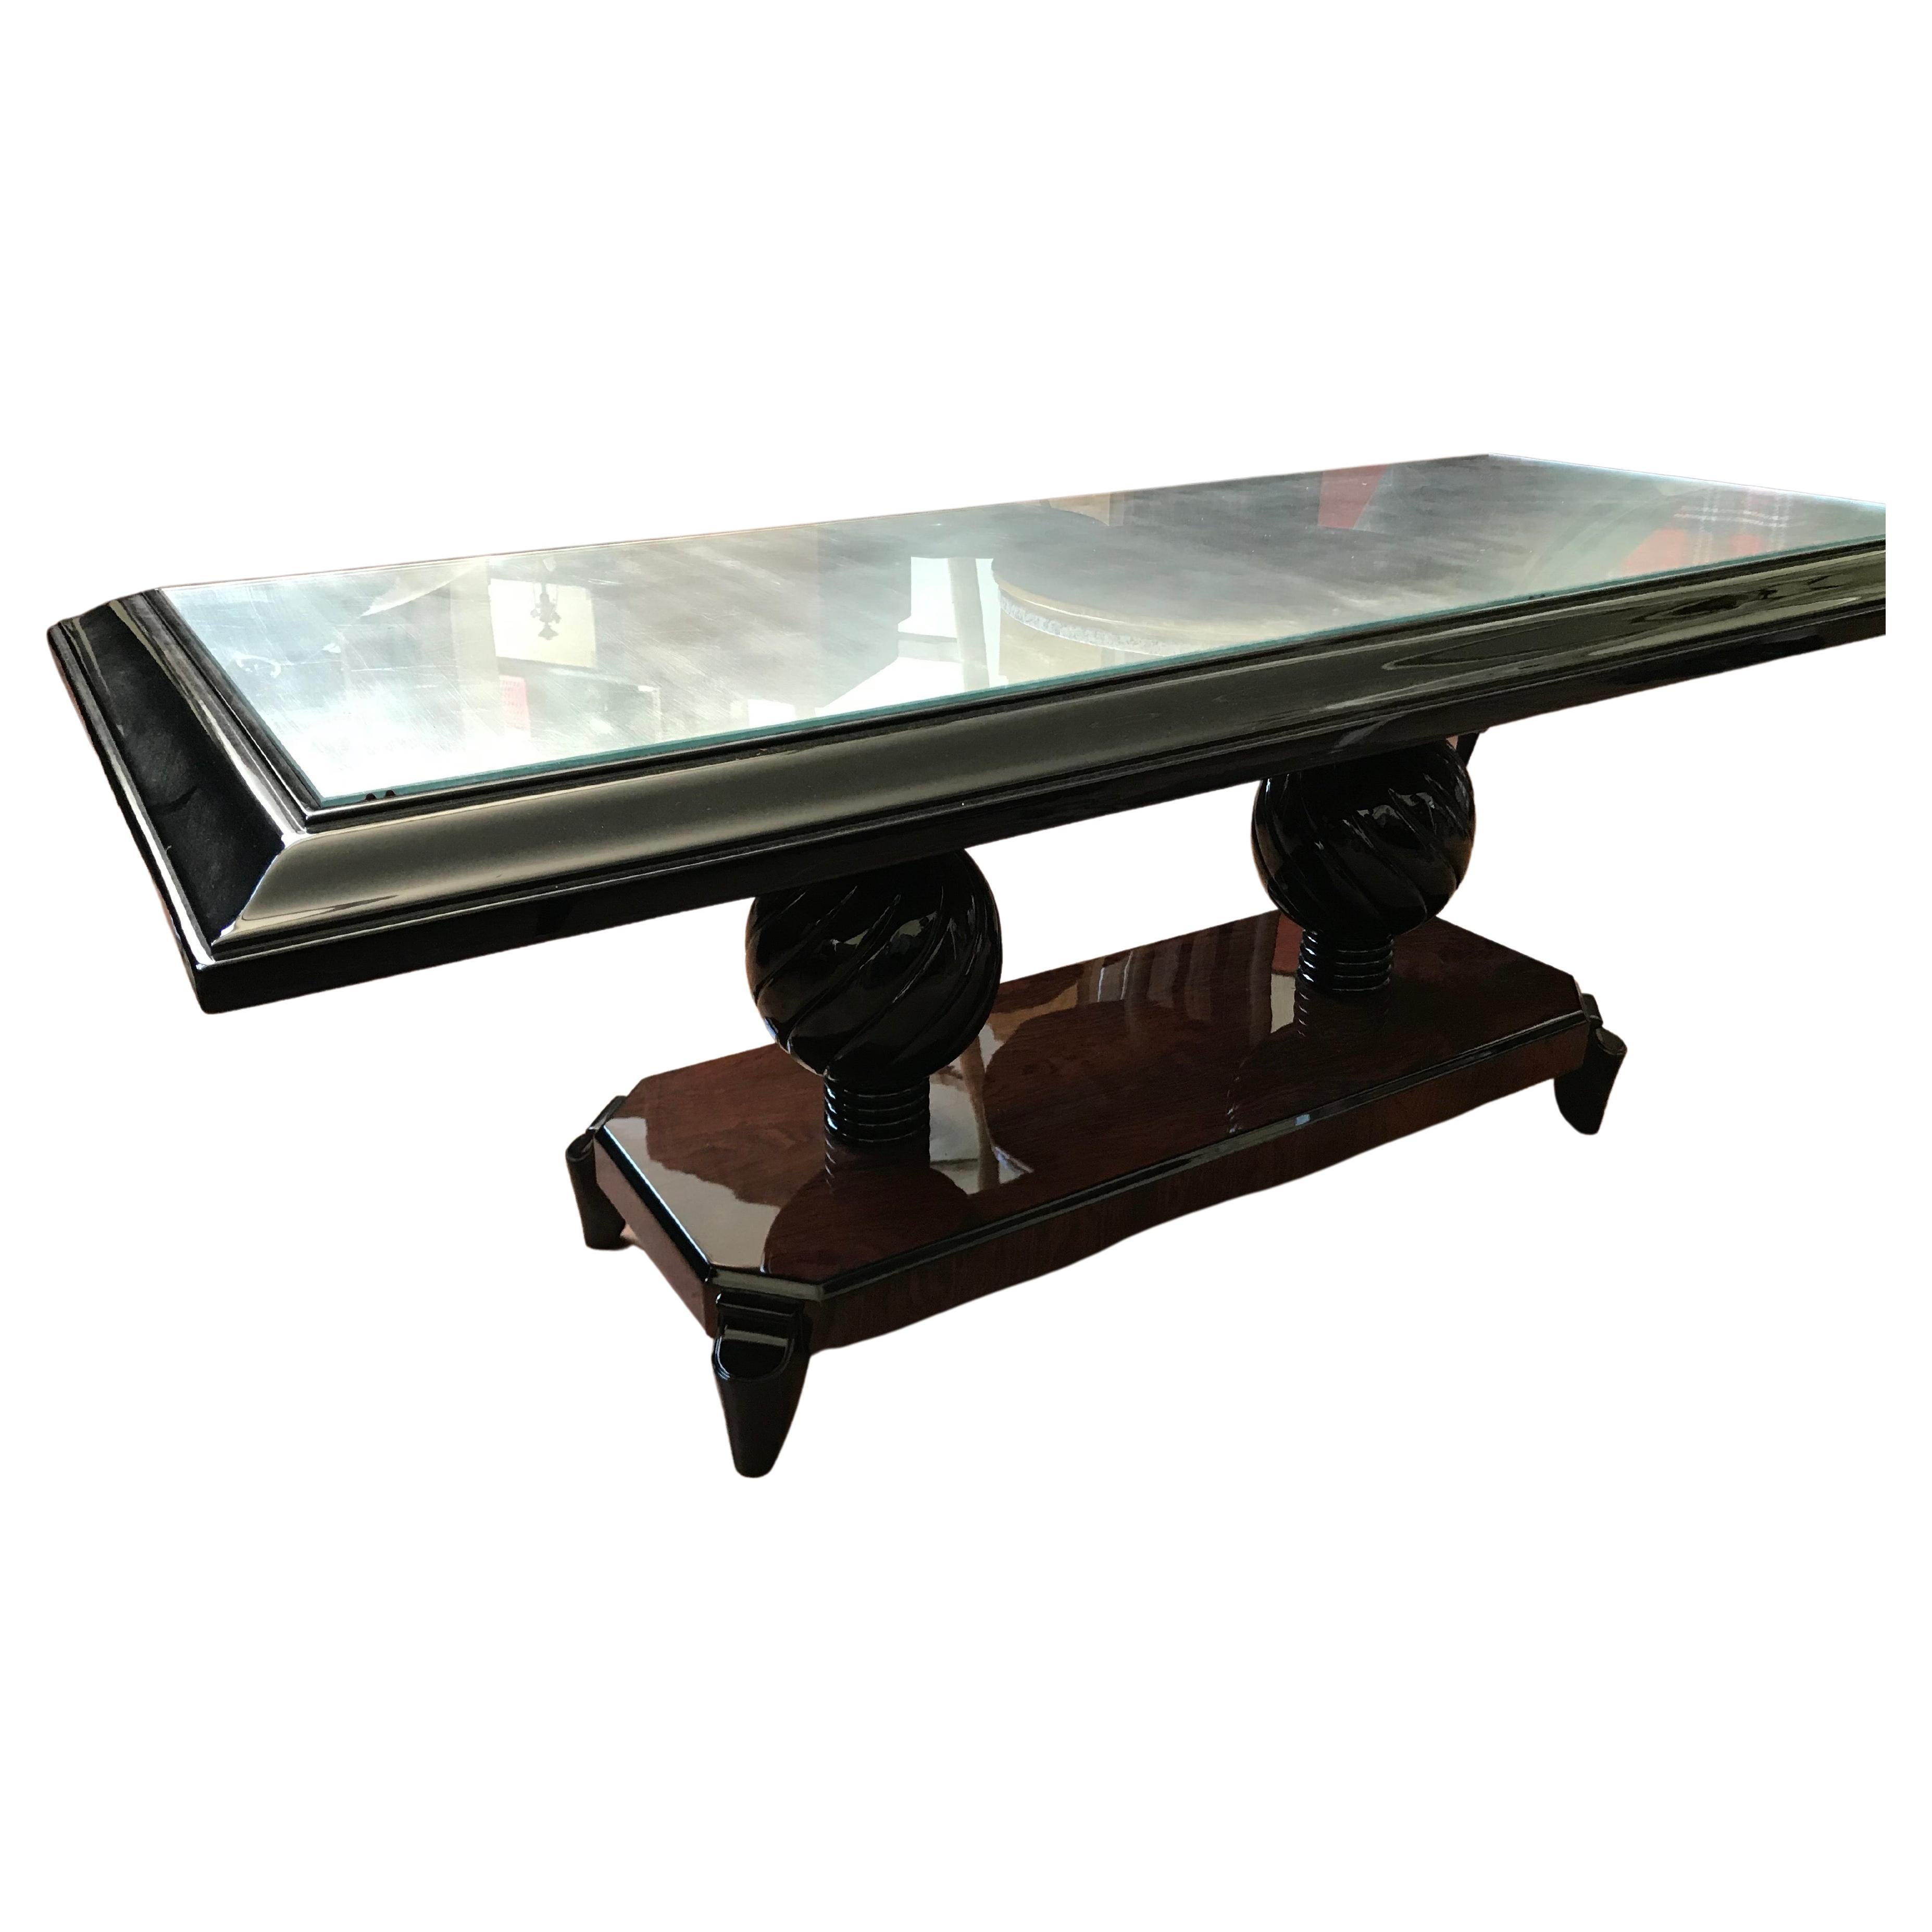  Massive large rectangular French Art Deco coffeetable, sofa table by Souyeux, Ebenist from Nay, South of France. 
Makassar veneer. Black lacquer. New spear glass. Professionally restored. Documented. Gazette Drouot.
Very solid quality.